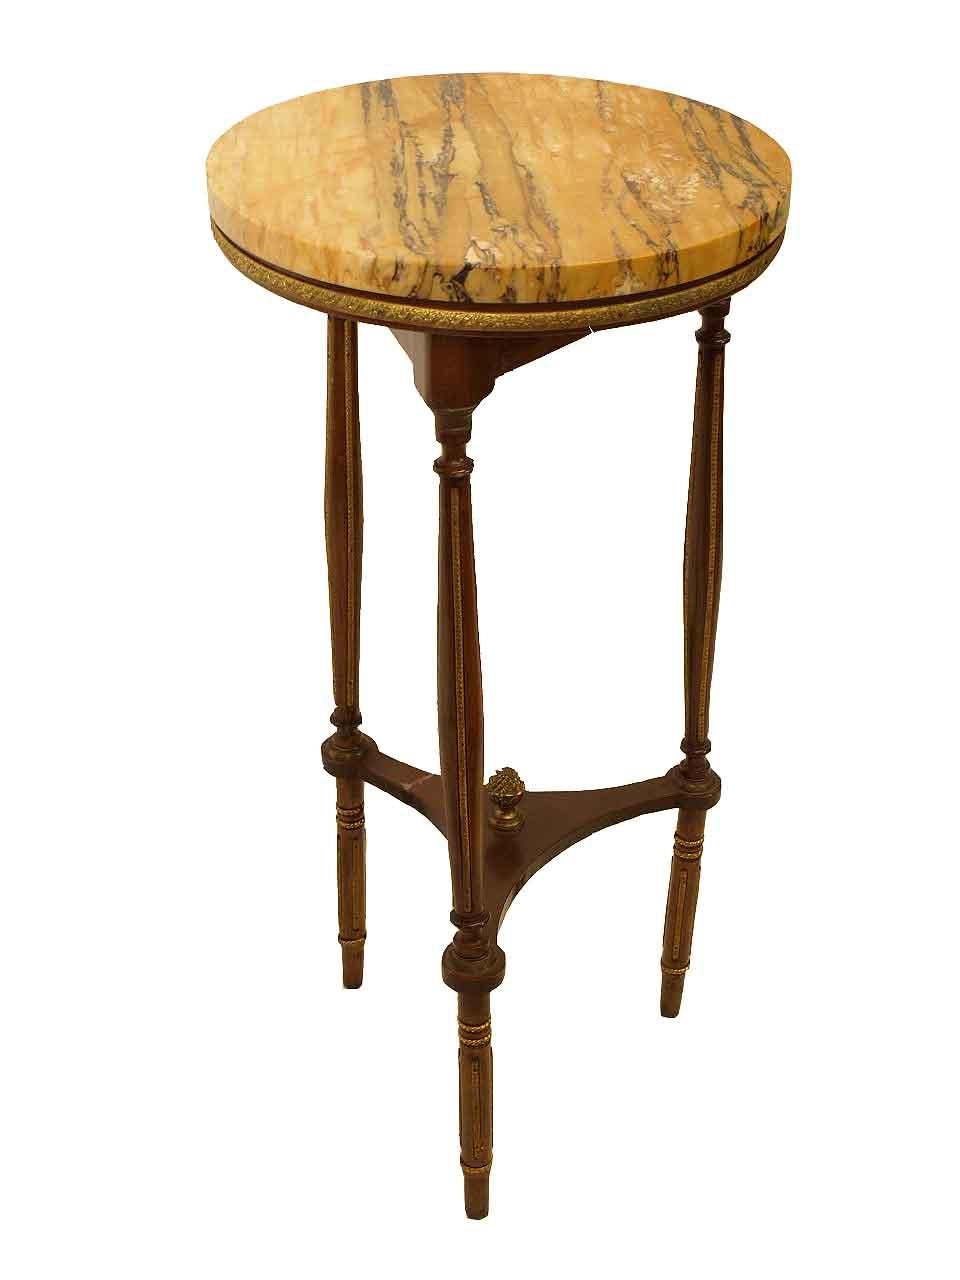 French round marble top table, with beautiful sienna marble top( removable) on a wood base surrounded by a gilt brass decorative band; turned and reeded legs with brass rings and brass appliques in the reeding; concave platform stretcher with gilded